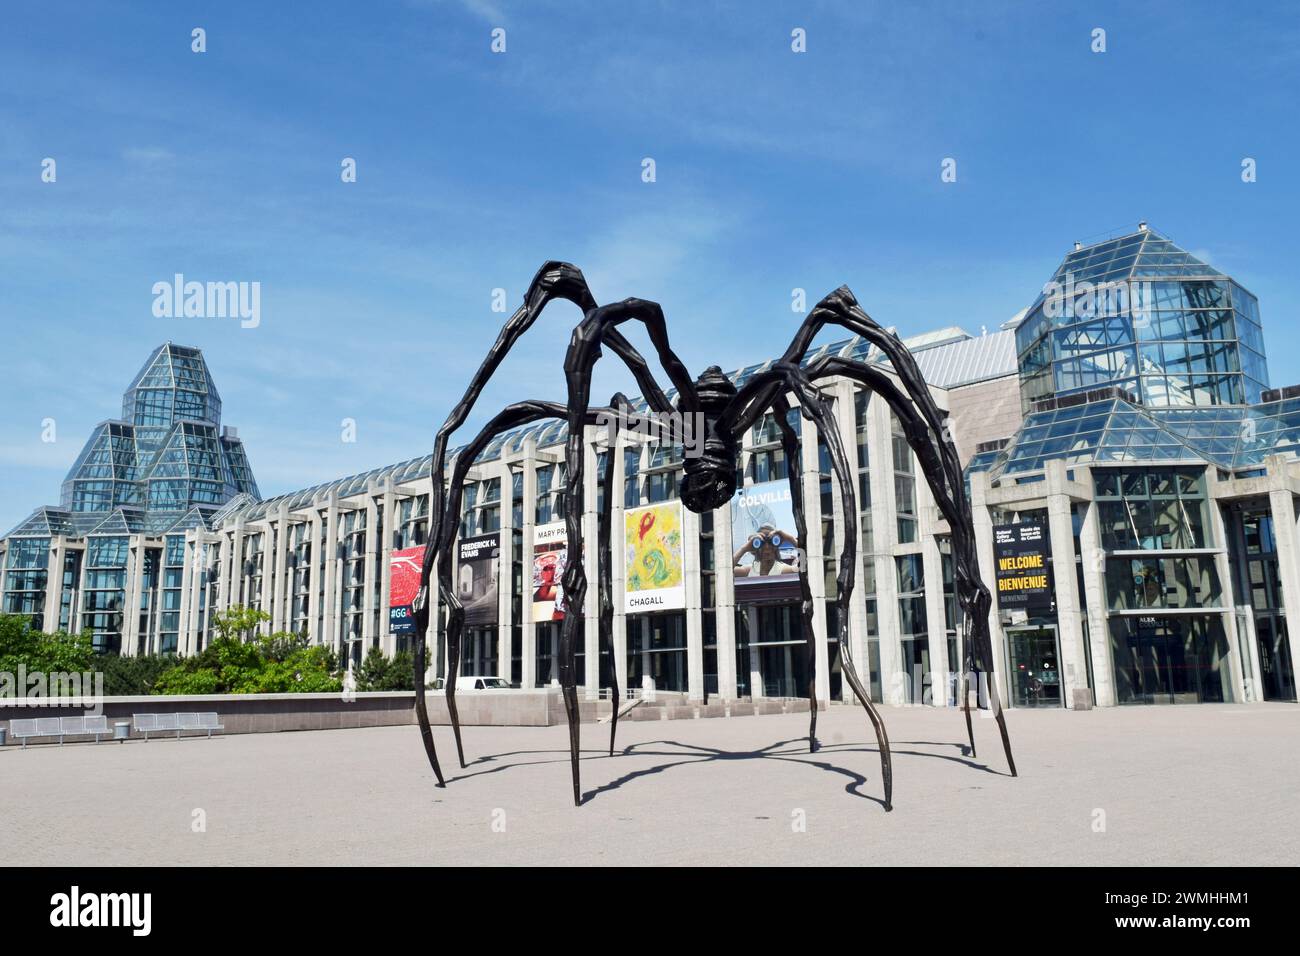 Maman Spider Sculpture by artist Louise Bourgeois and the National Gallery of Canada in Ottawa, Ontario, Canada Stock Photo